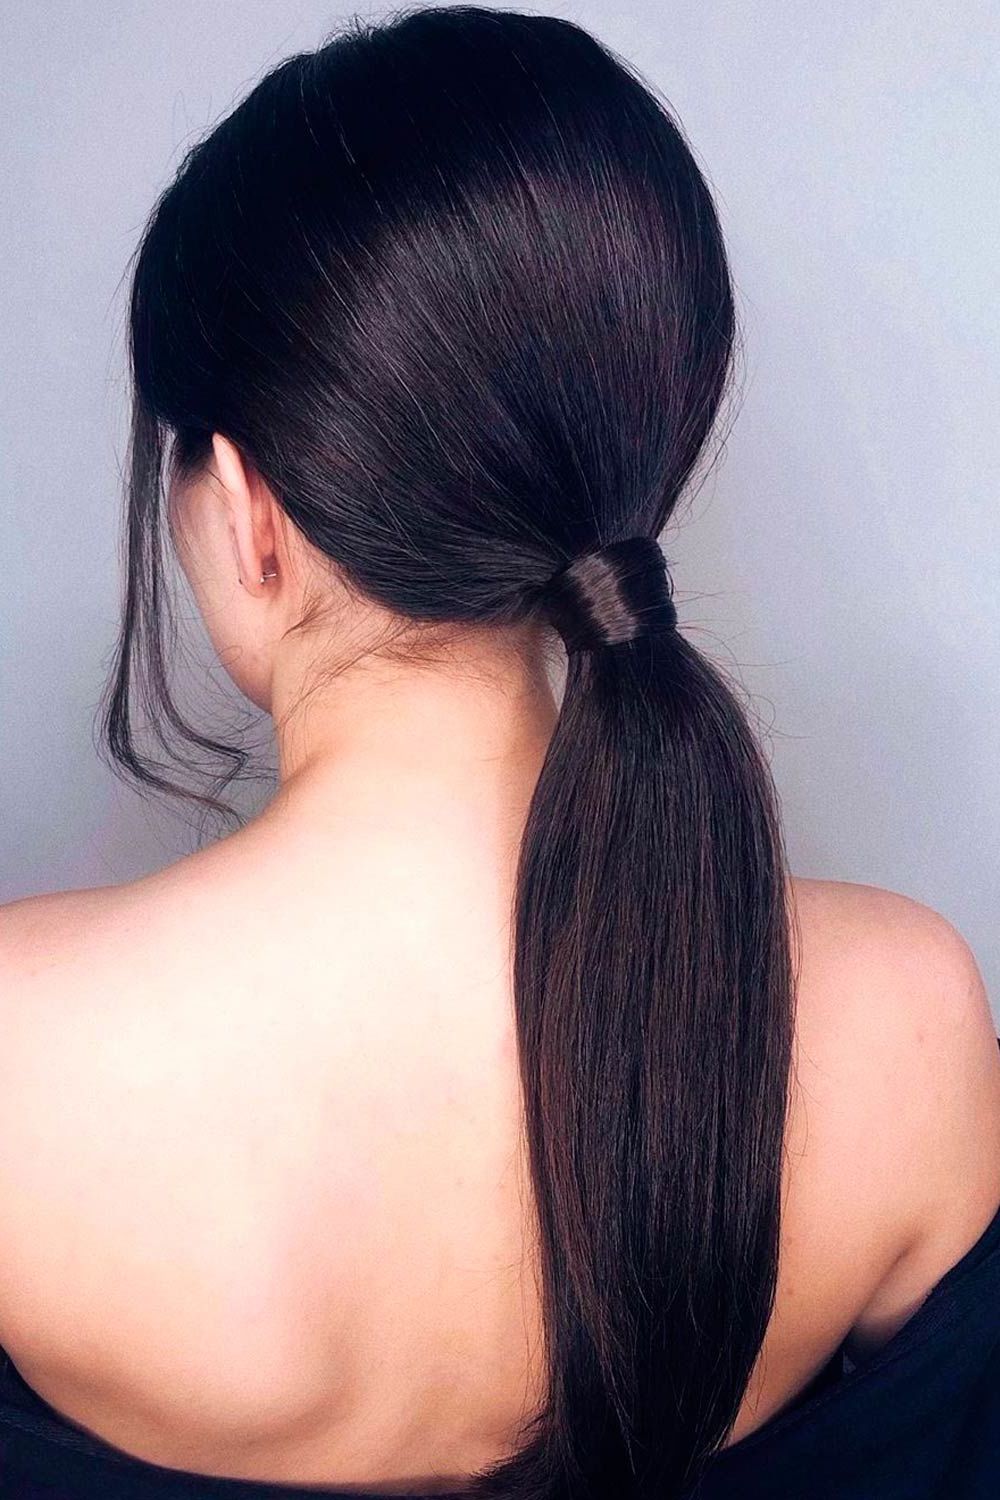 35 Unique Low Ponytail Ideas For Simple But Attractive Looks Within Most Popular Low Pony Hairstyles With Bangs (View 5 of 25)